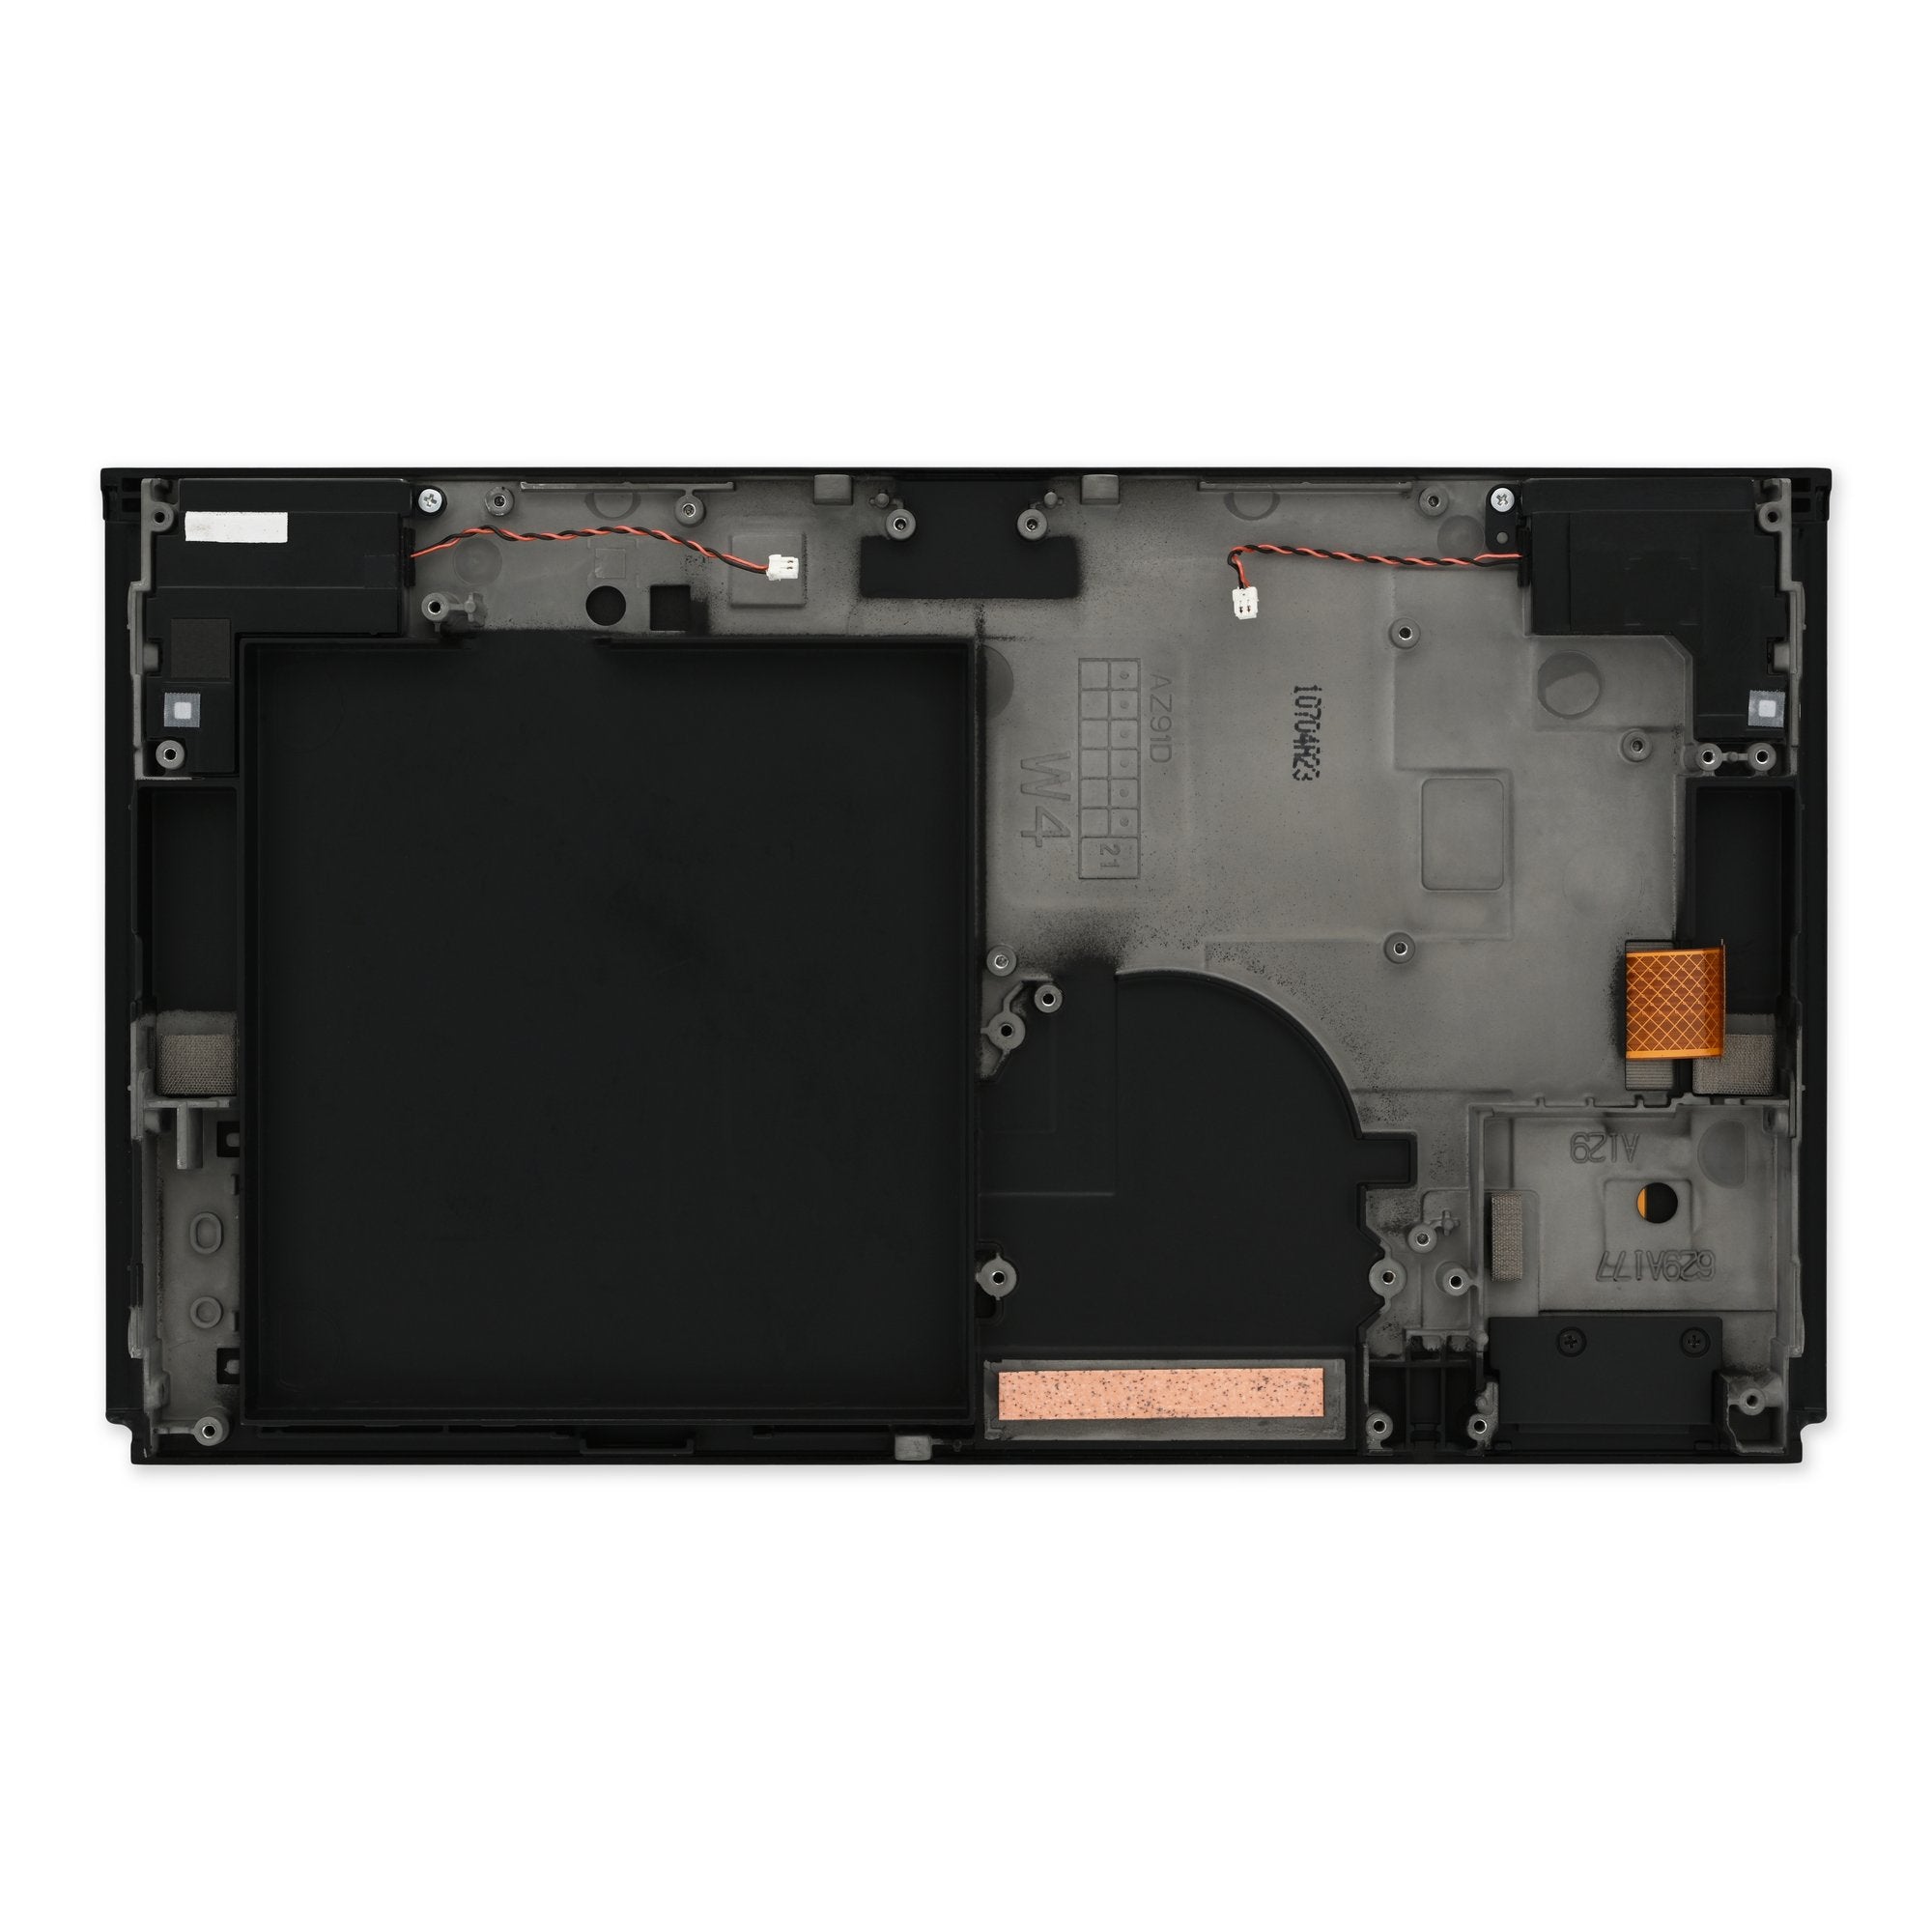 Nintendo Switch OLED Screen Assembly